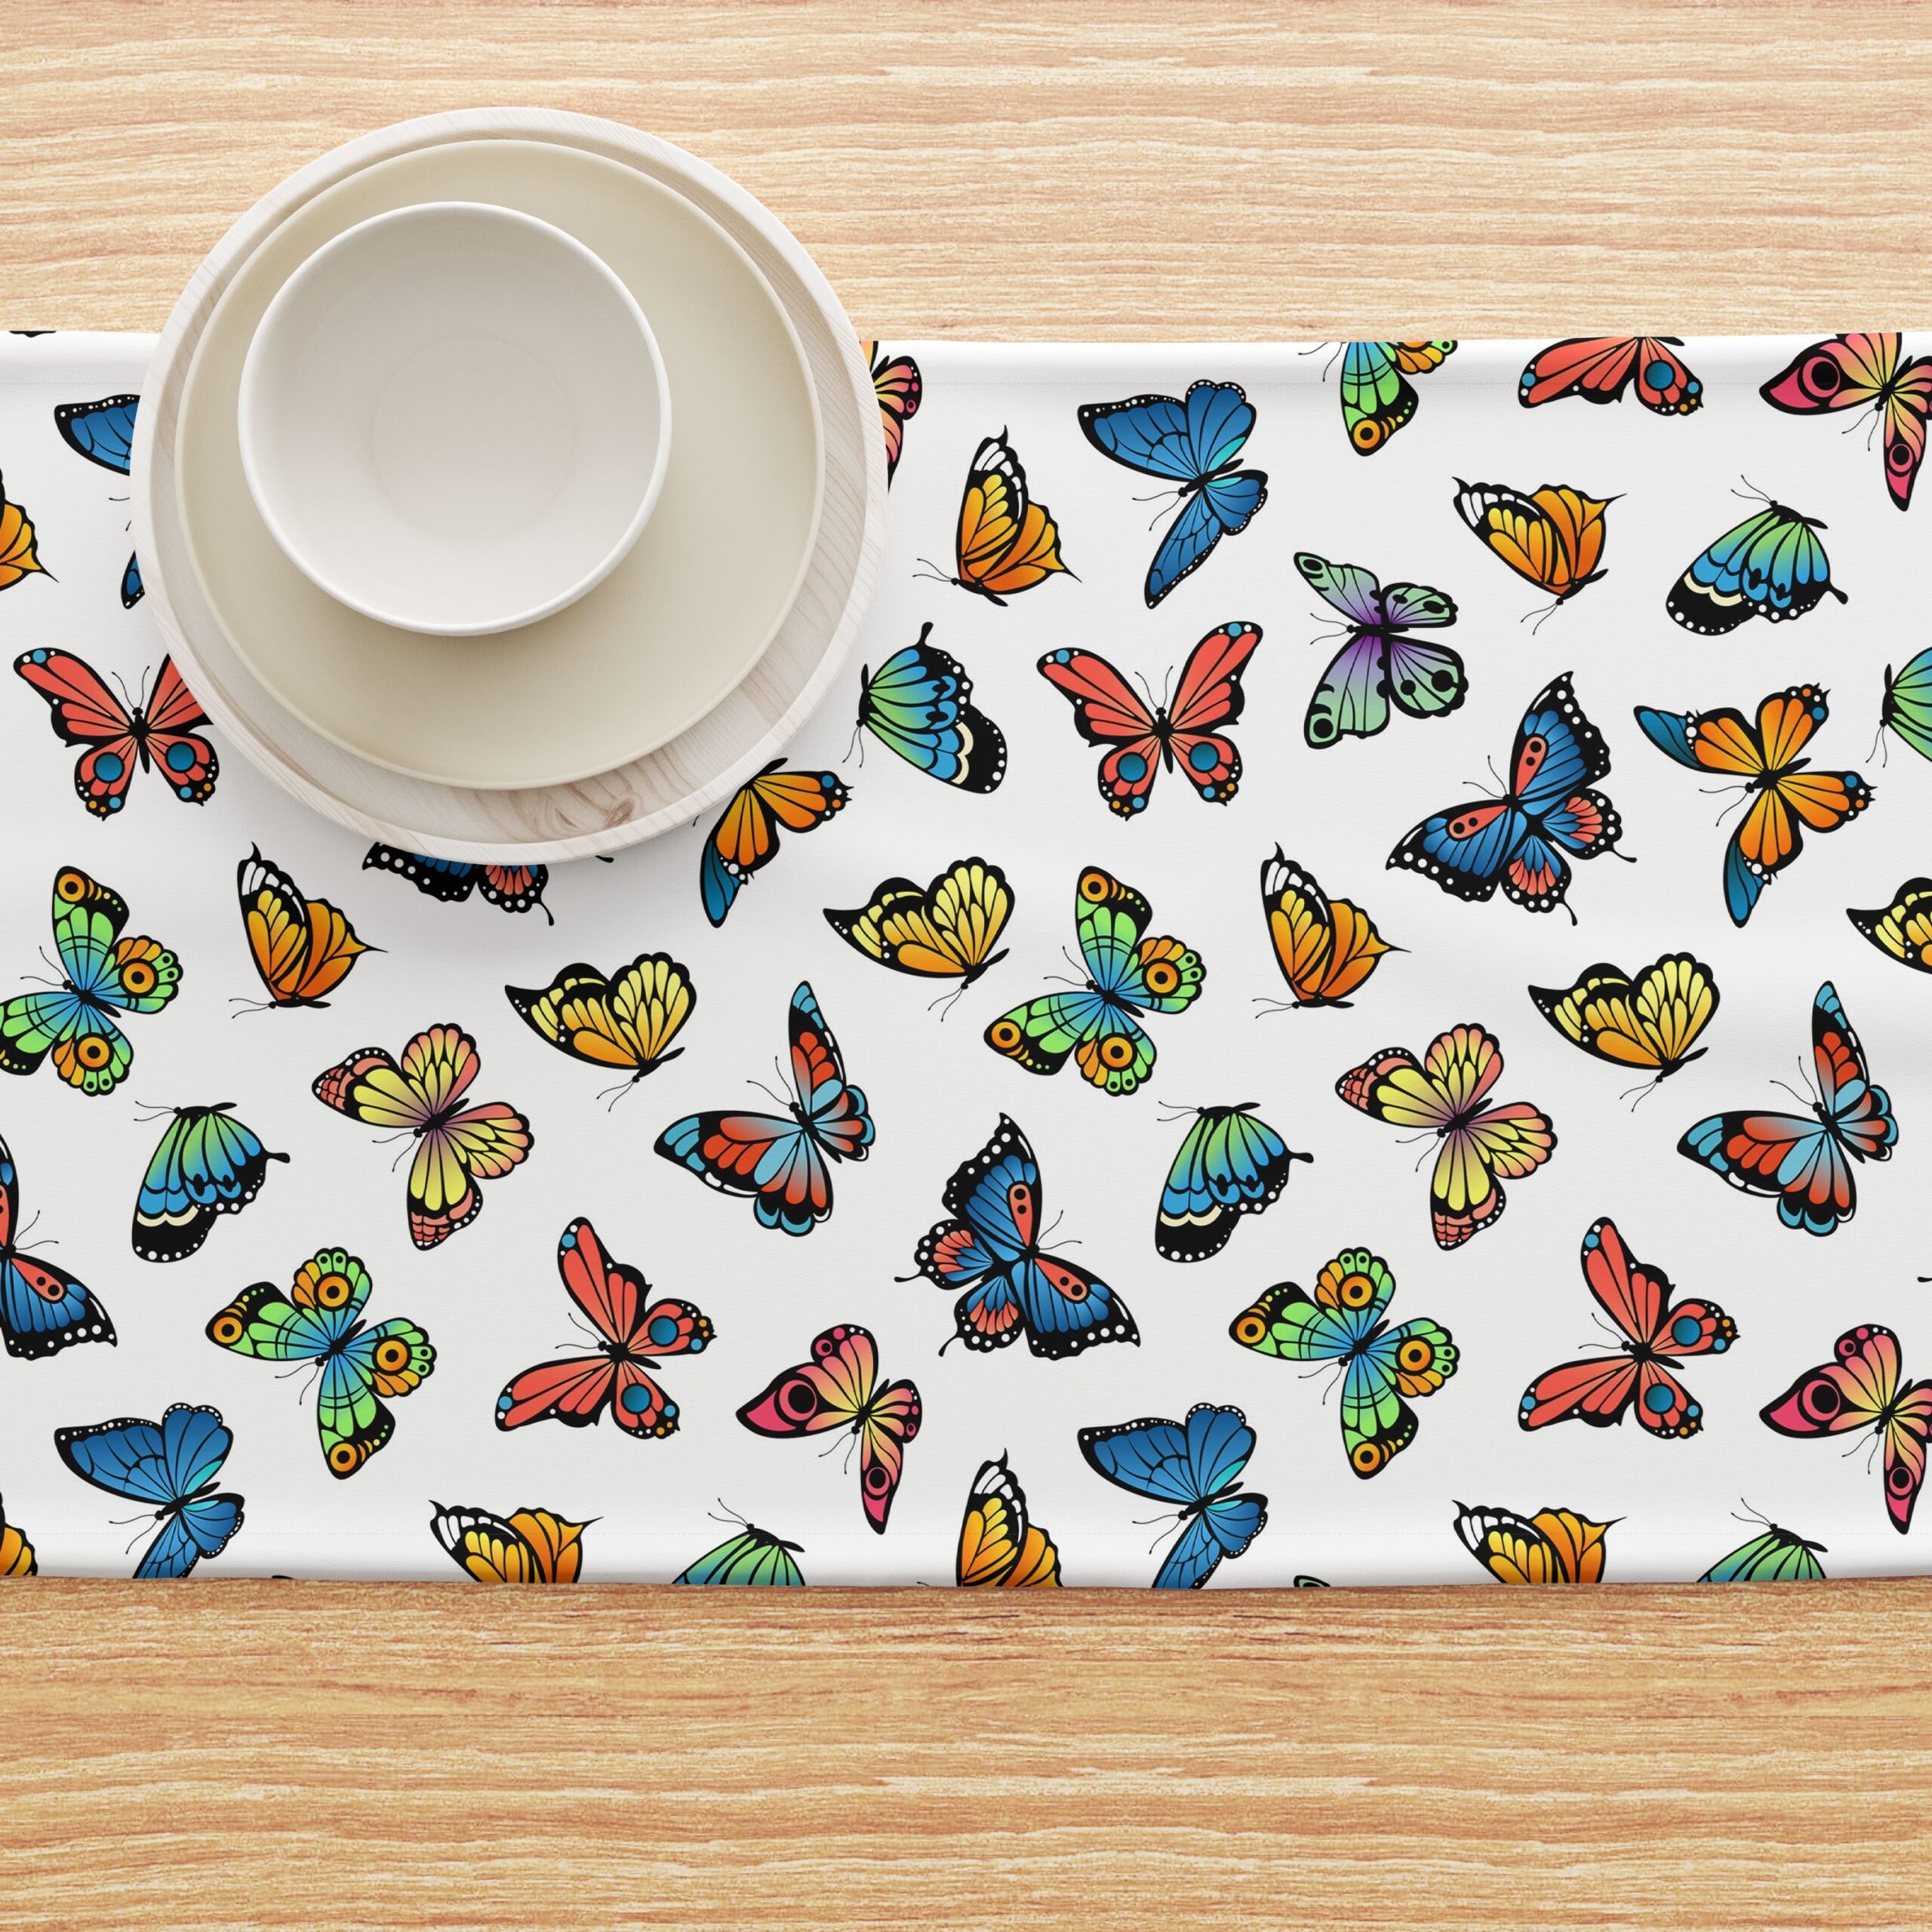 Fabric Textile Products, Inc. Table Runner, 100% Cotton, 16x108", Butterflies in Bold Colors